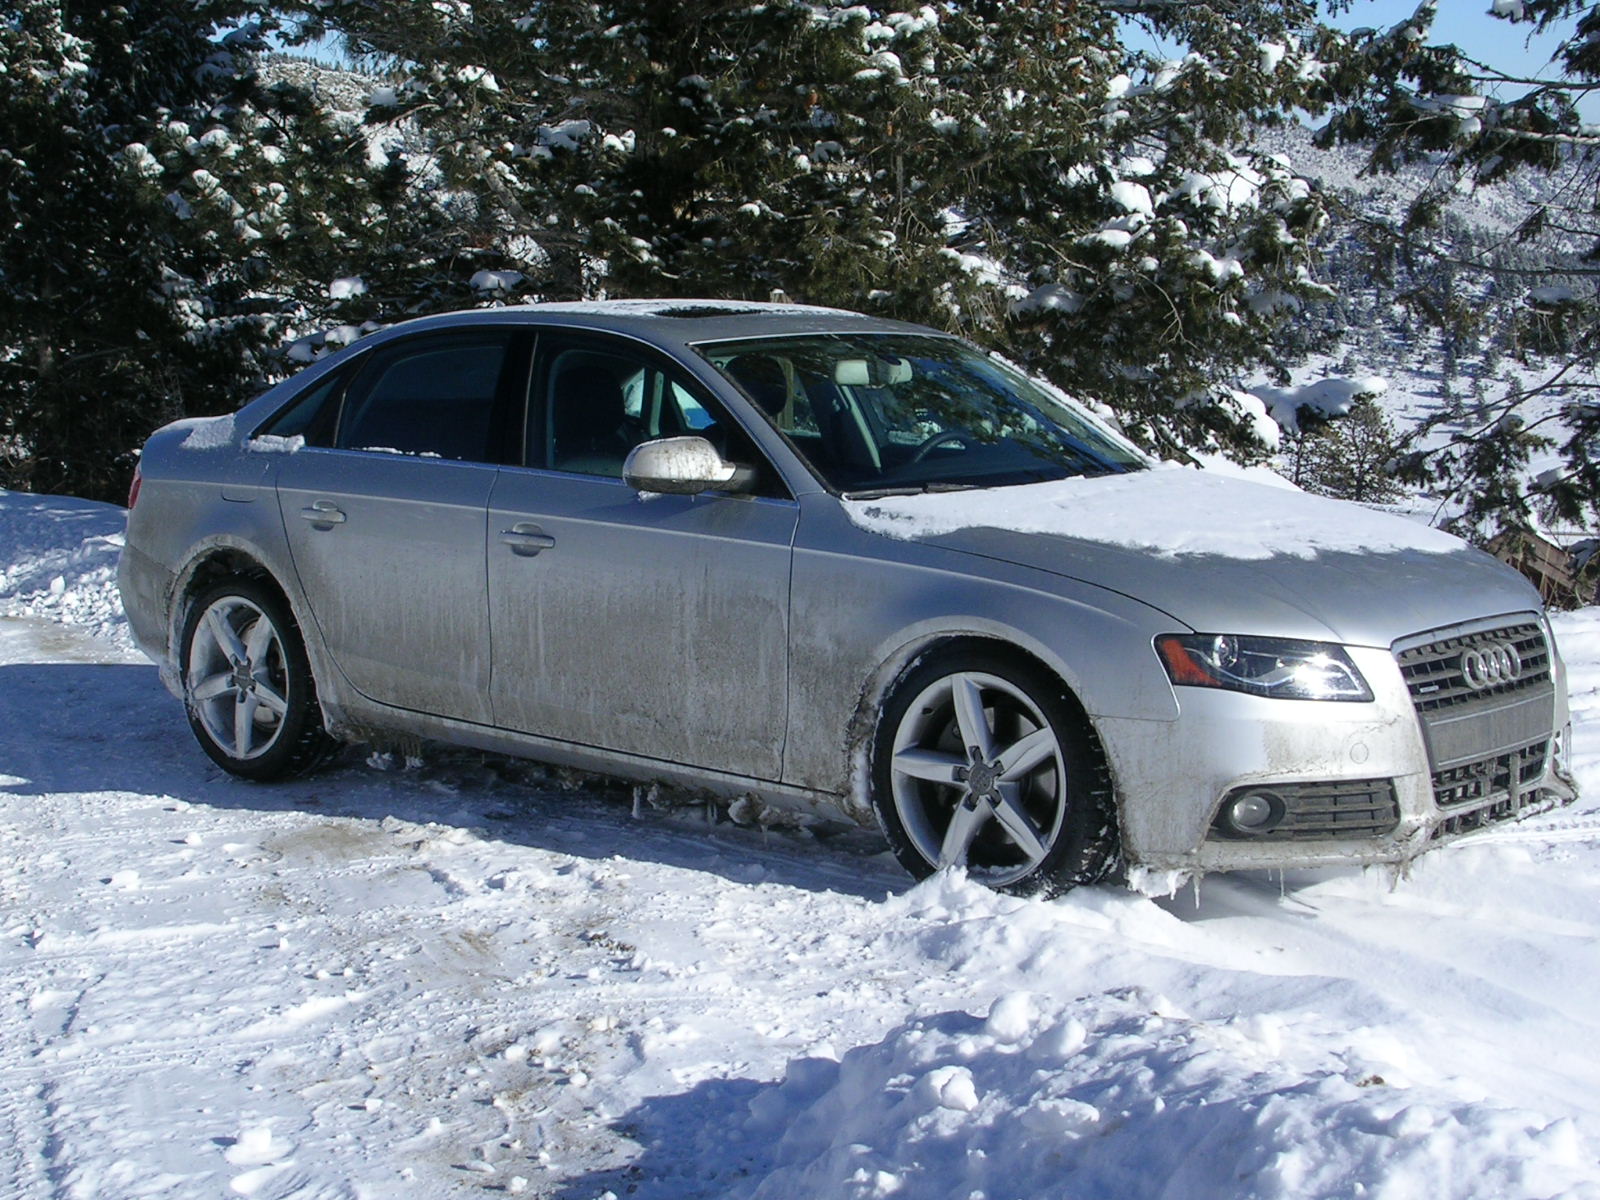 Audi Denver on 2010 Audi A4 Quattro  Looking For A Great Winter Vehicle